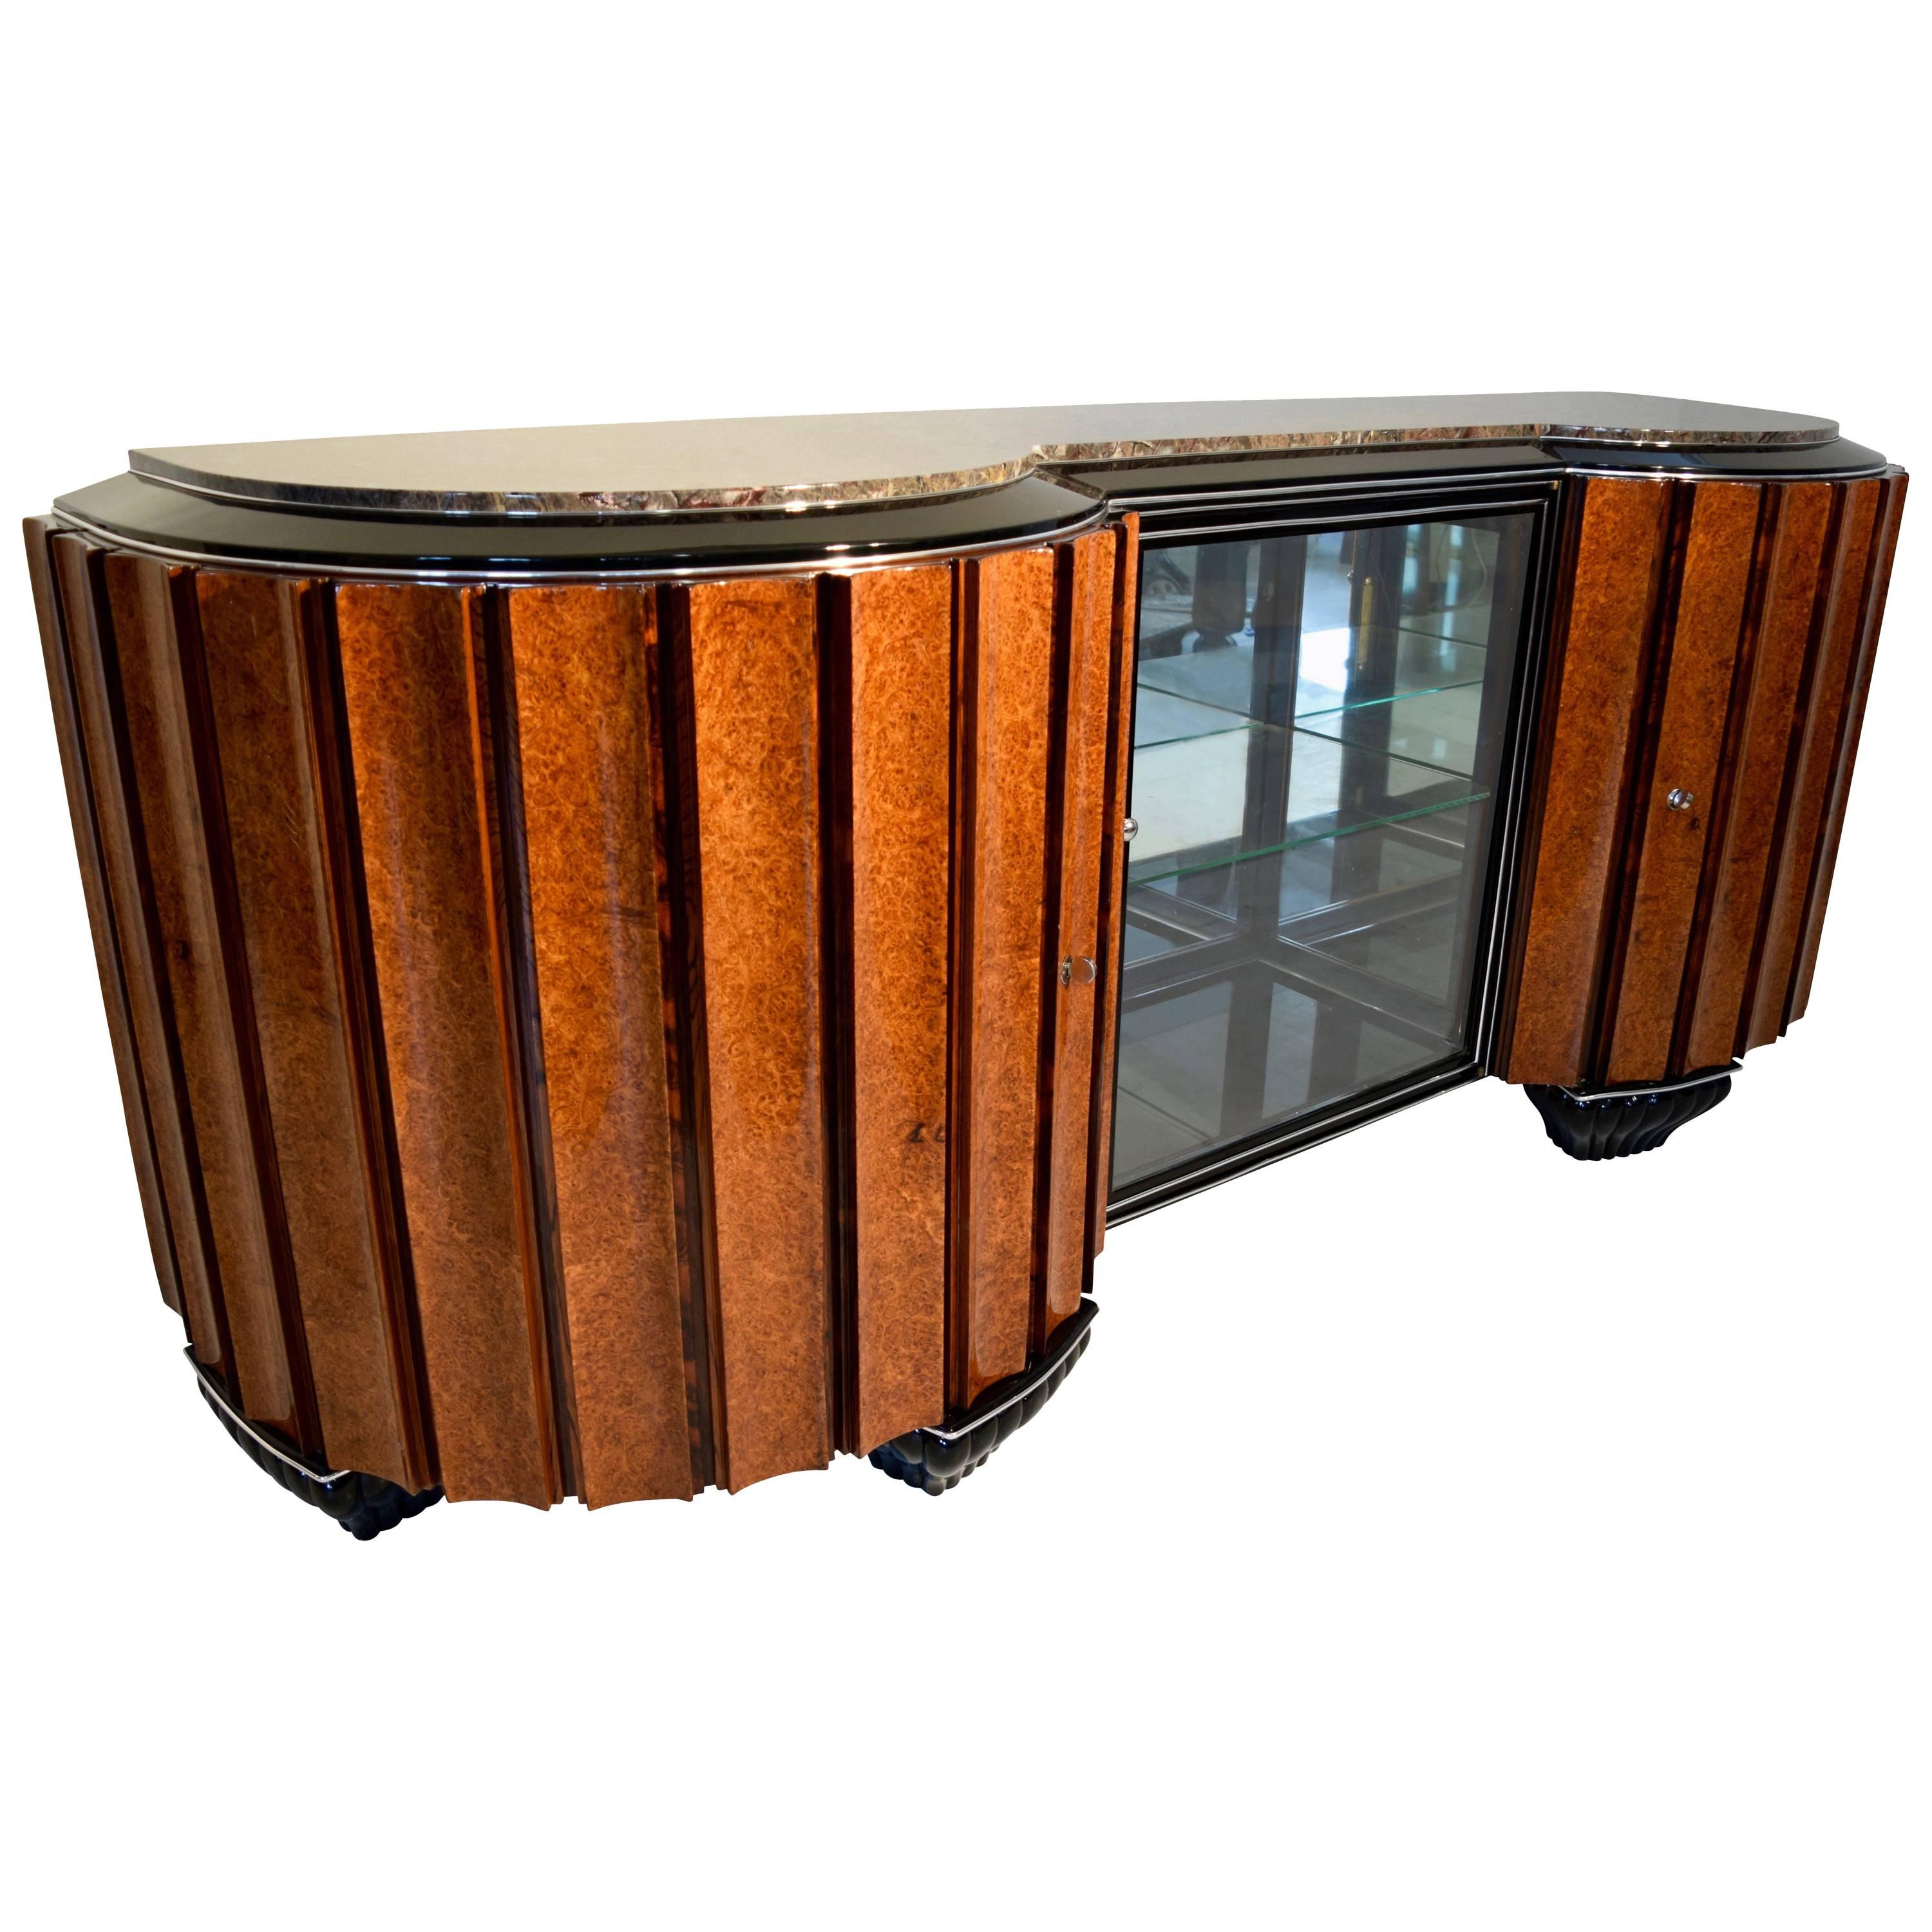 Large Art Deco Sideboard, Amboyna Burl and Rosewood, Paris, France circa 1925 For Sale